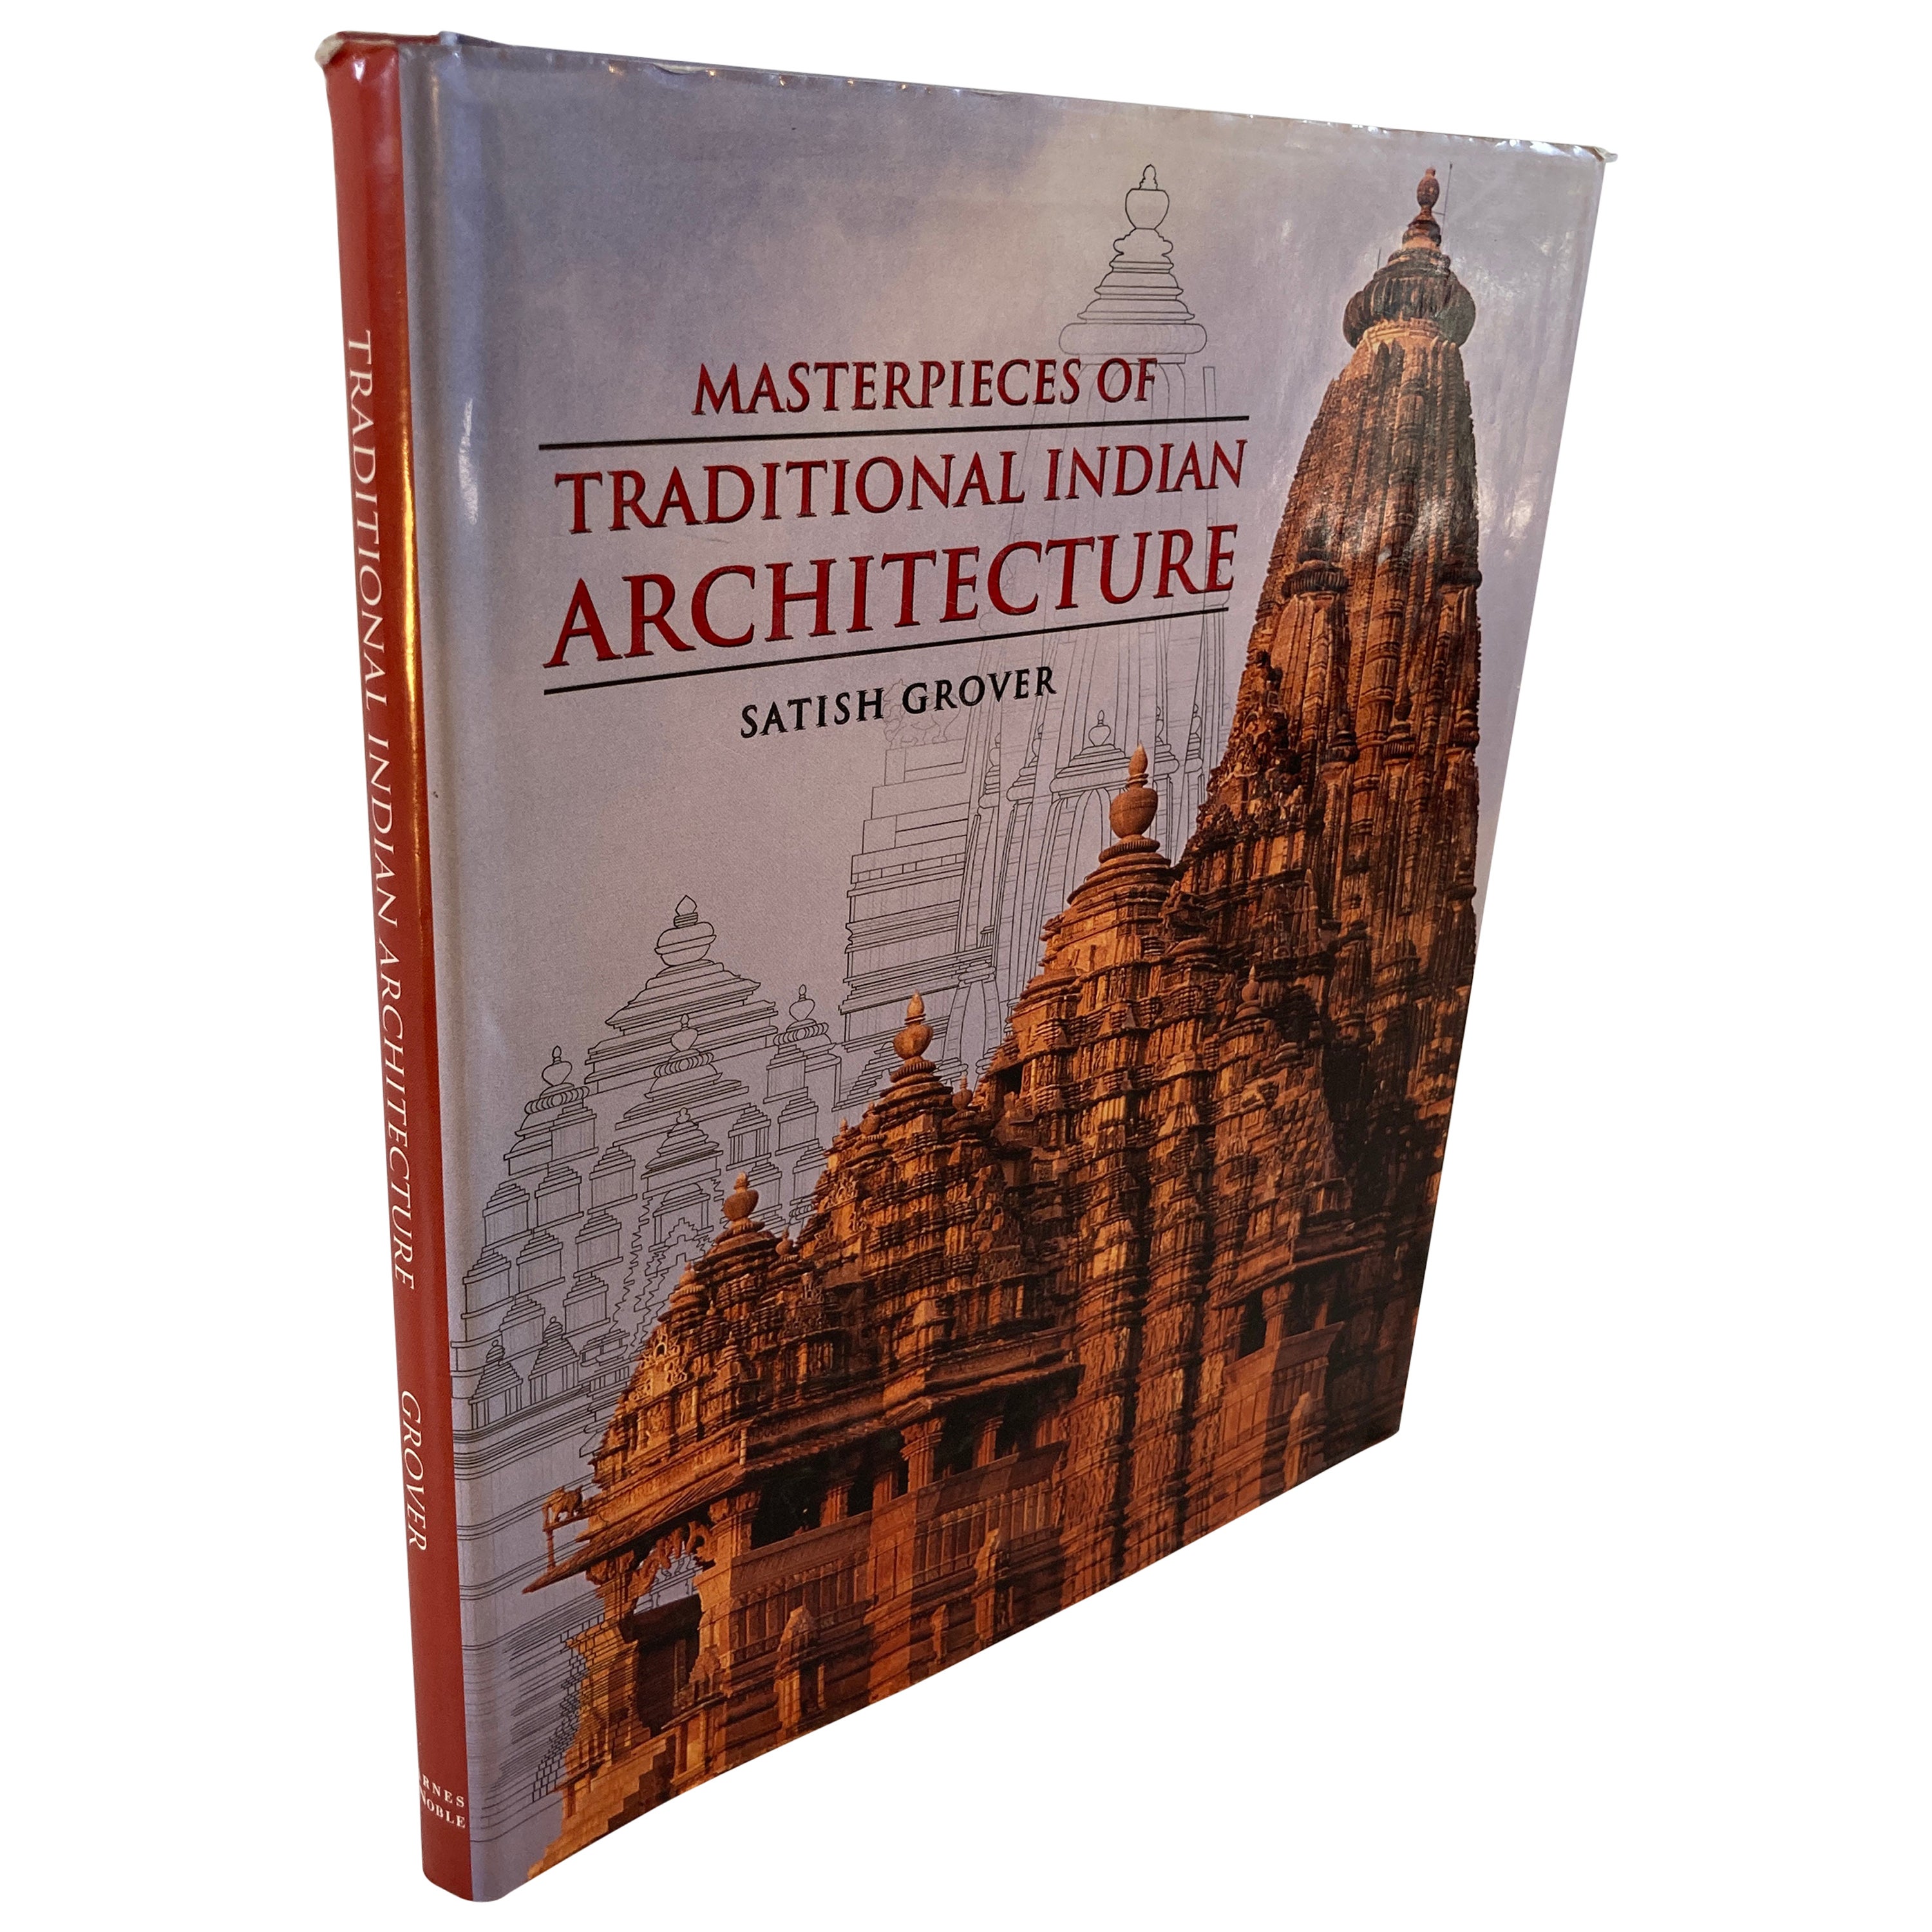 Masterpieces of Traditional Indian Architecture Art Book For Sale